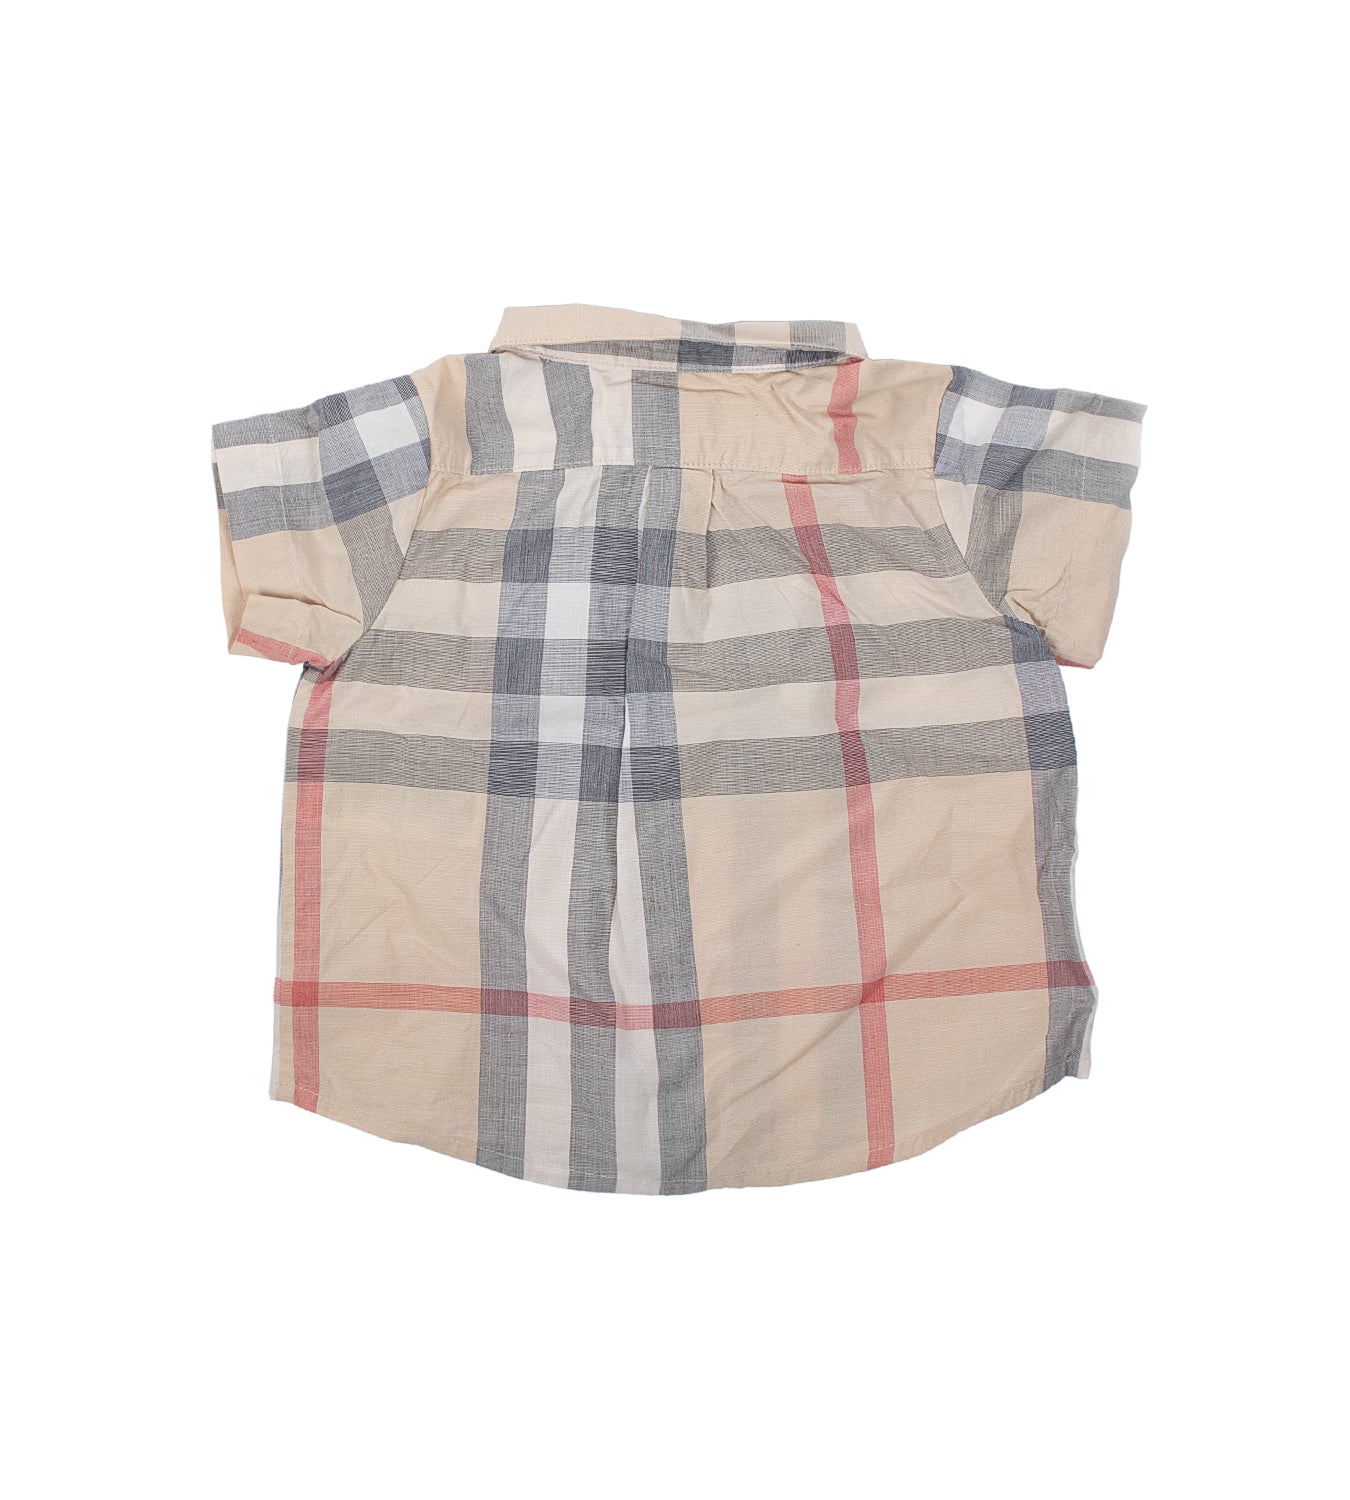 Vintage Check-Point Shirt